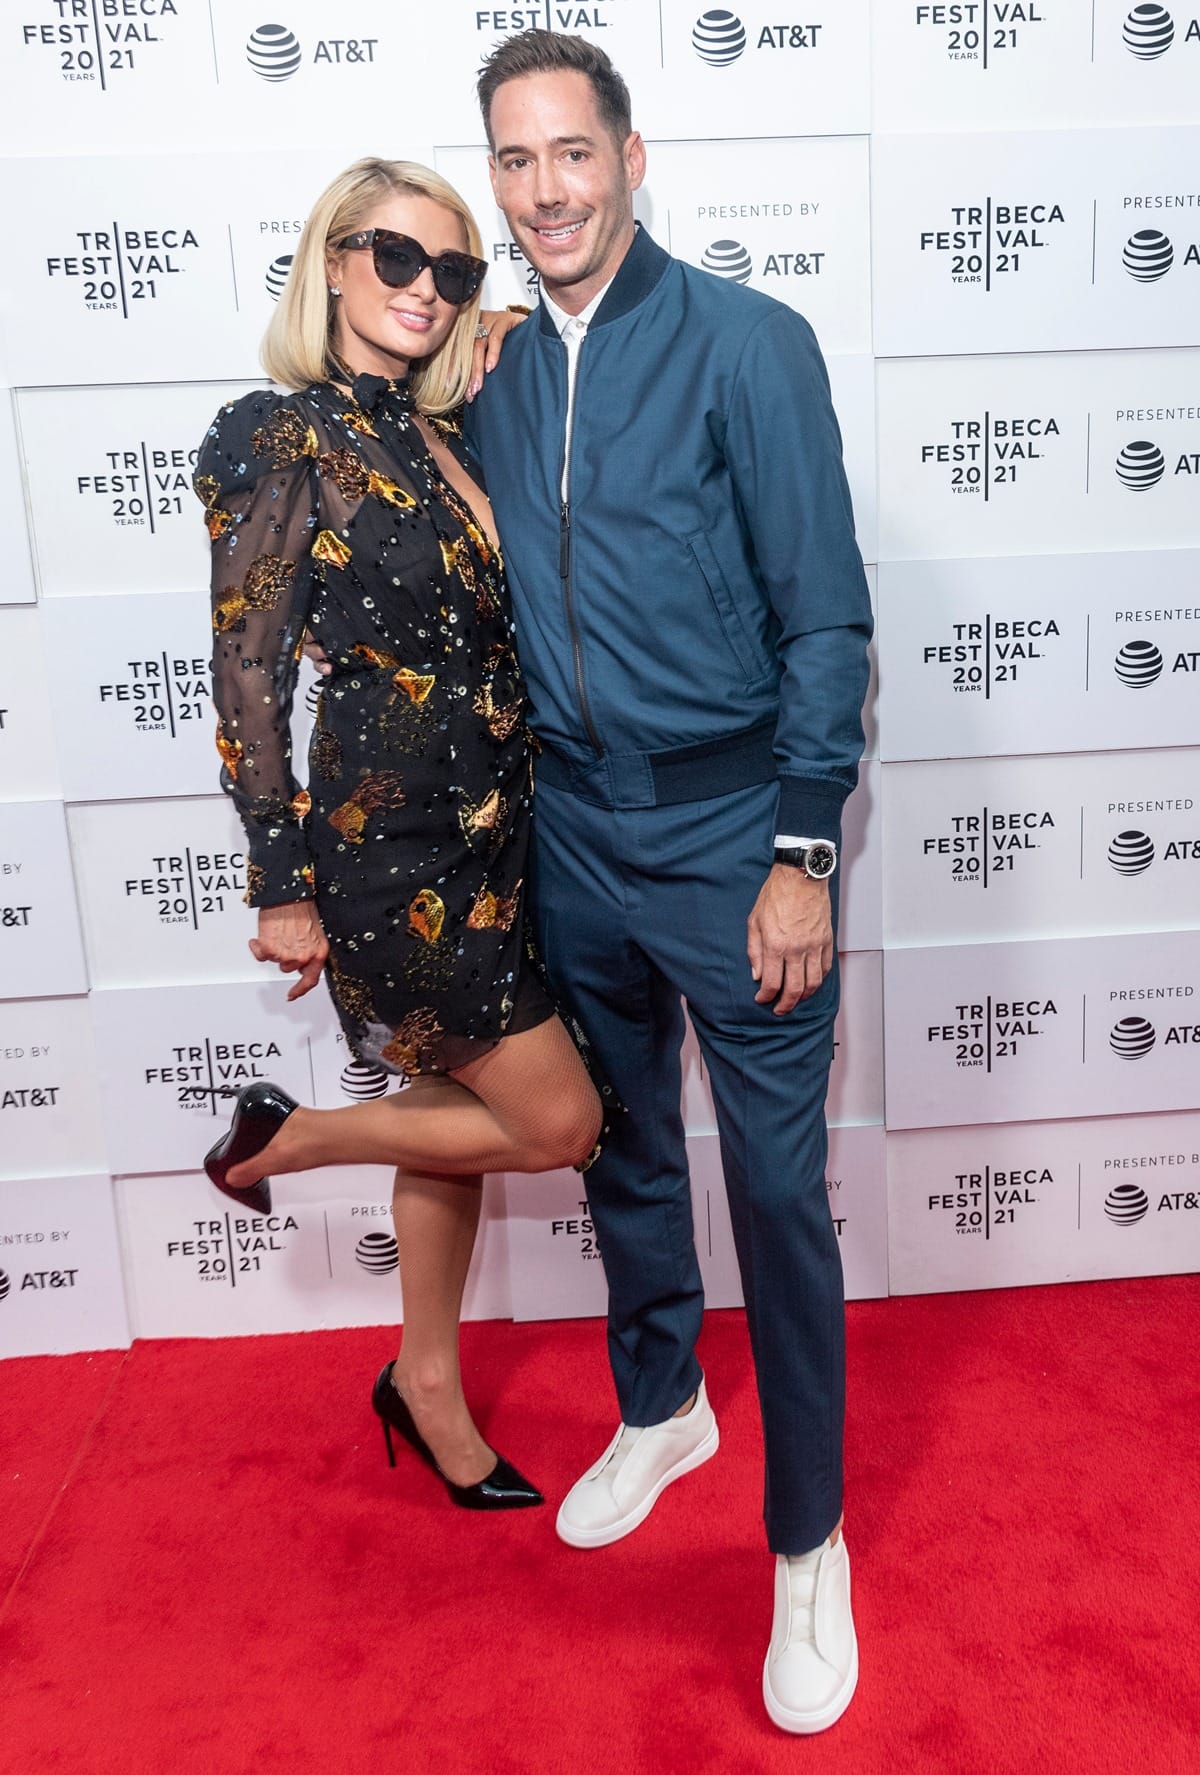 Paris Hilton attended the premiere of her documentary. This Is Paris, with her fiancé Carter Reum at the  2021 Tribeca Festival